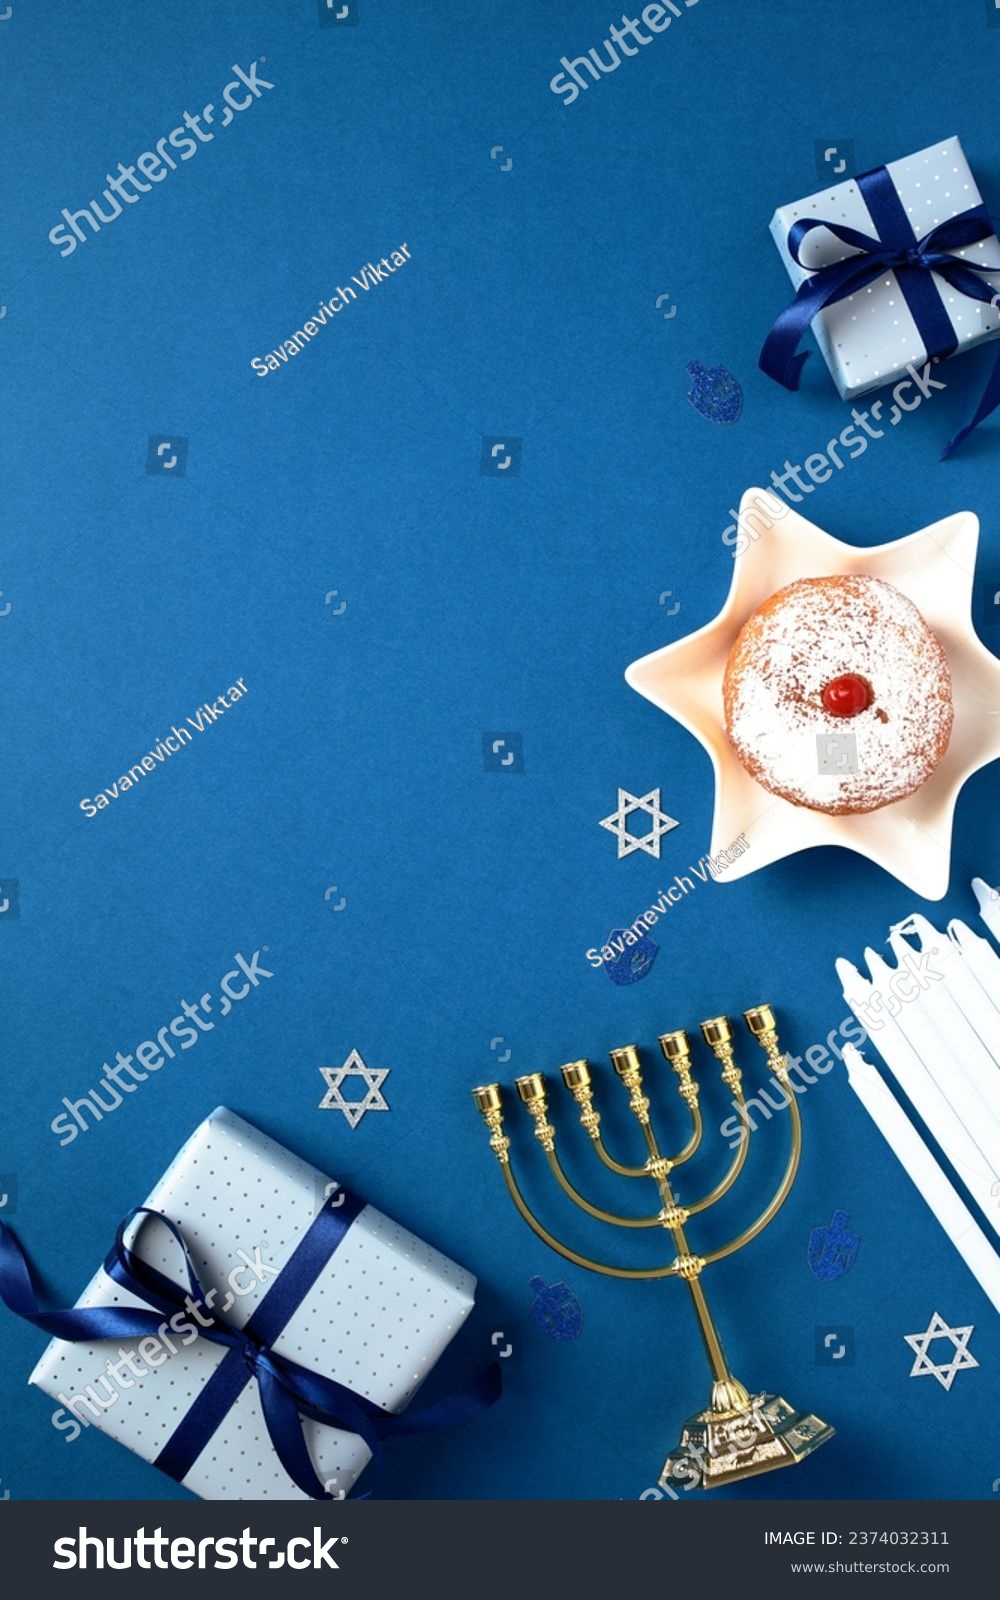 Hanukkah Jewish holiday vertical background with gold menorah, gift boxes, candles, traditional donut with jam on blue table. Flat lay, top view. #2374032311